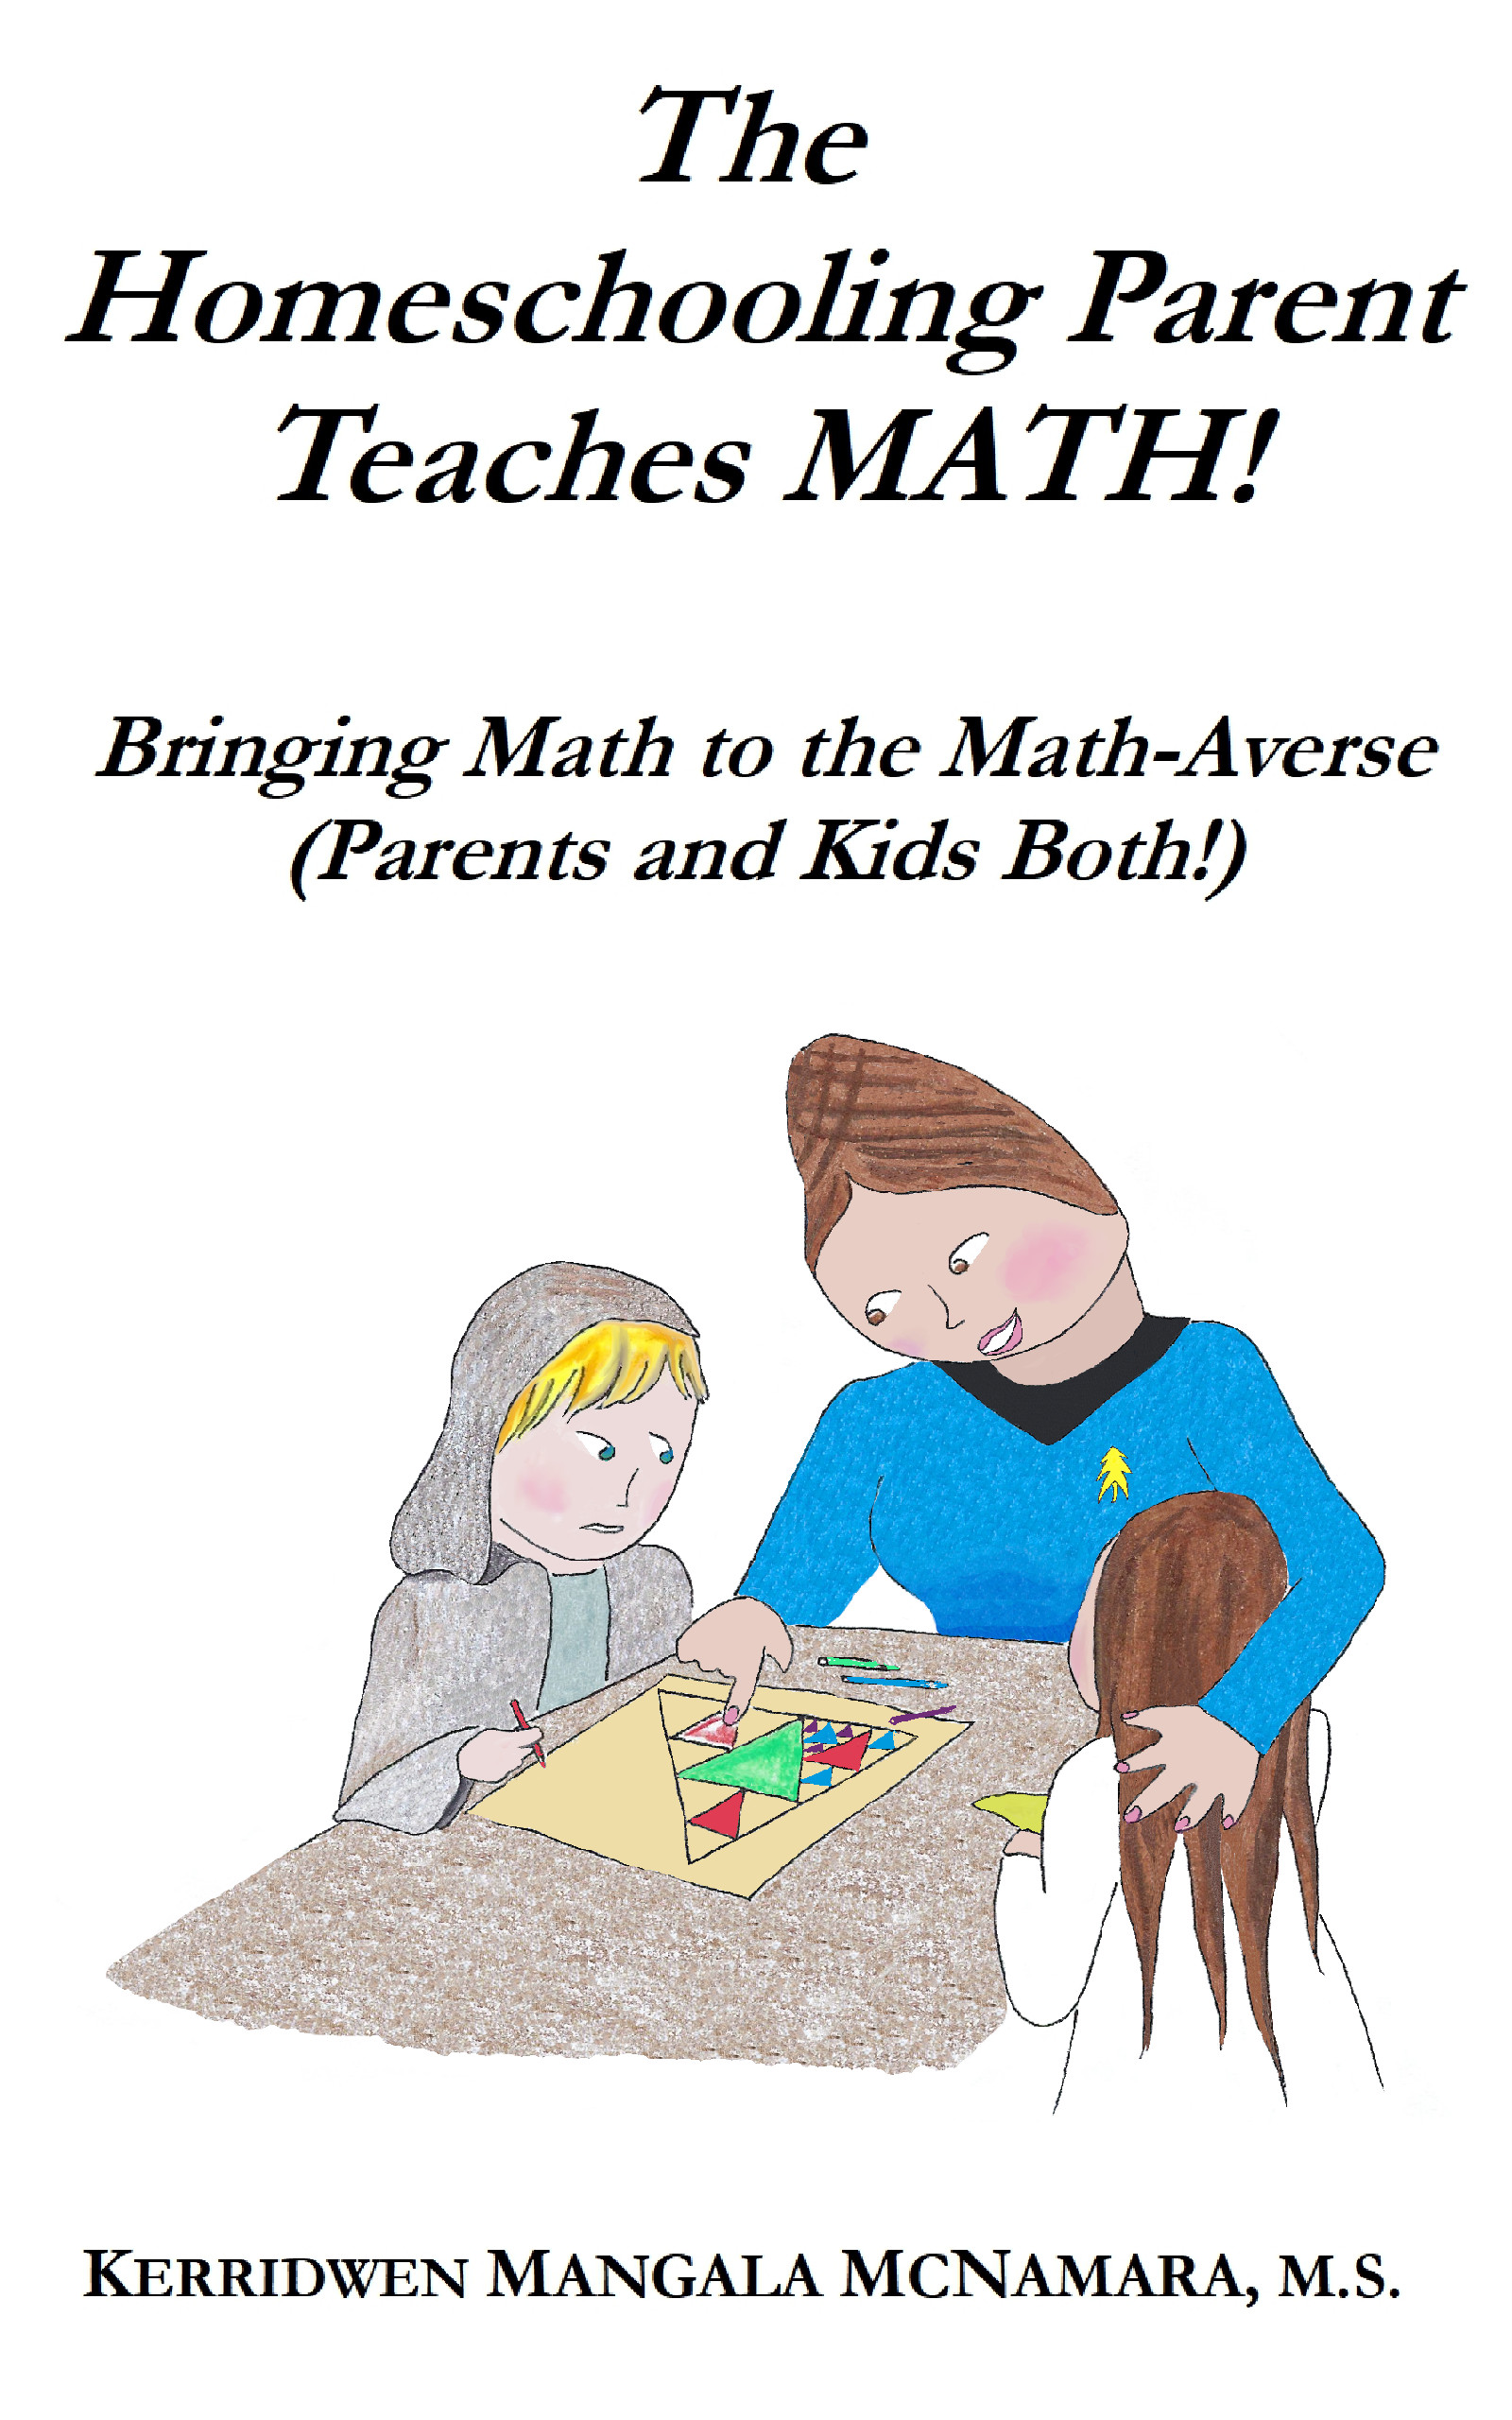 Cover for The Homeschooling Parent Teaches Math! book